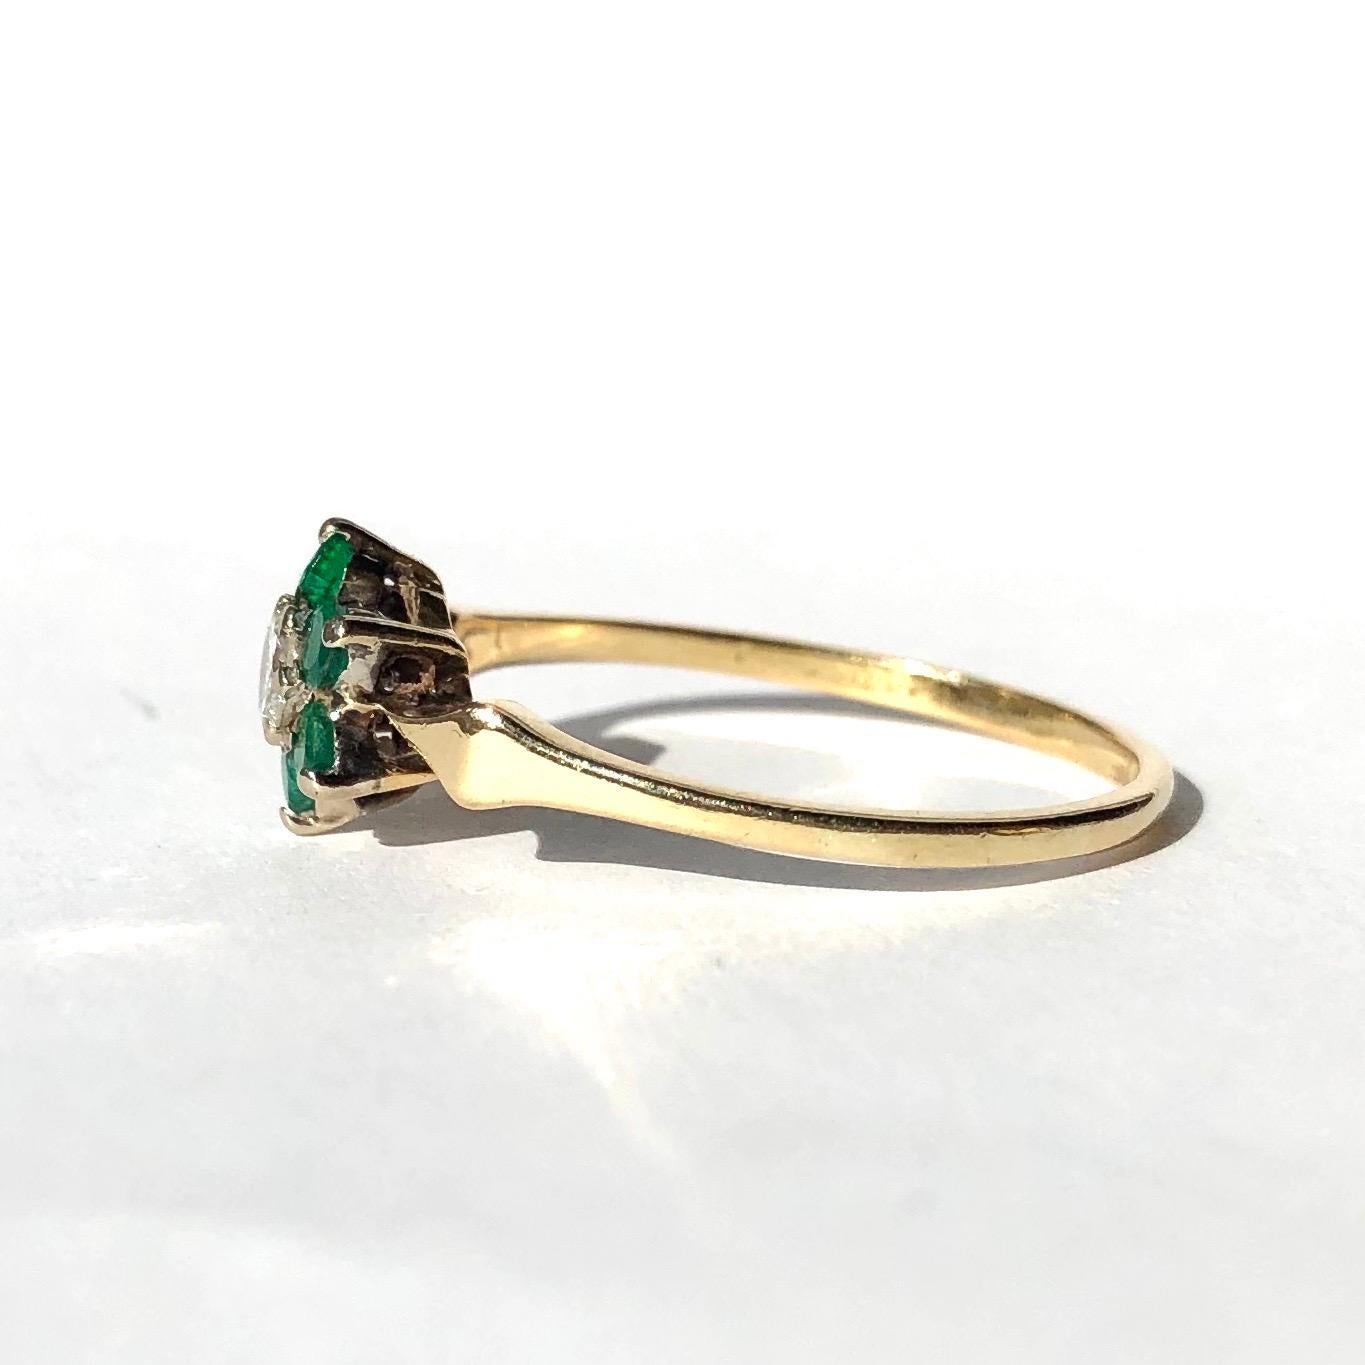 This gorgeous cluster is made up of six bright green emerald measuring 5pts each which encircle a bright sparkling 25pt diamond. The shoulders are modelled into delicate points which hold the cluster. 

Ring Size: R 1/2 or 9
Cluster Diameter: